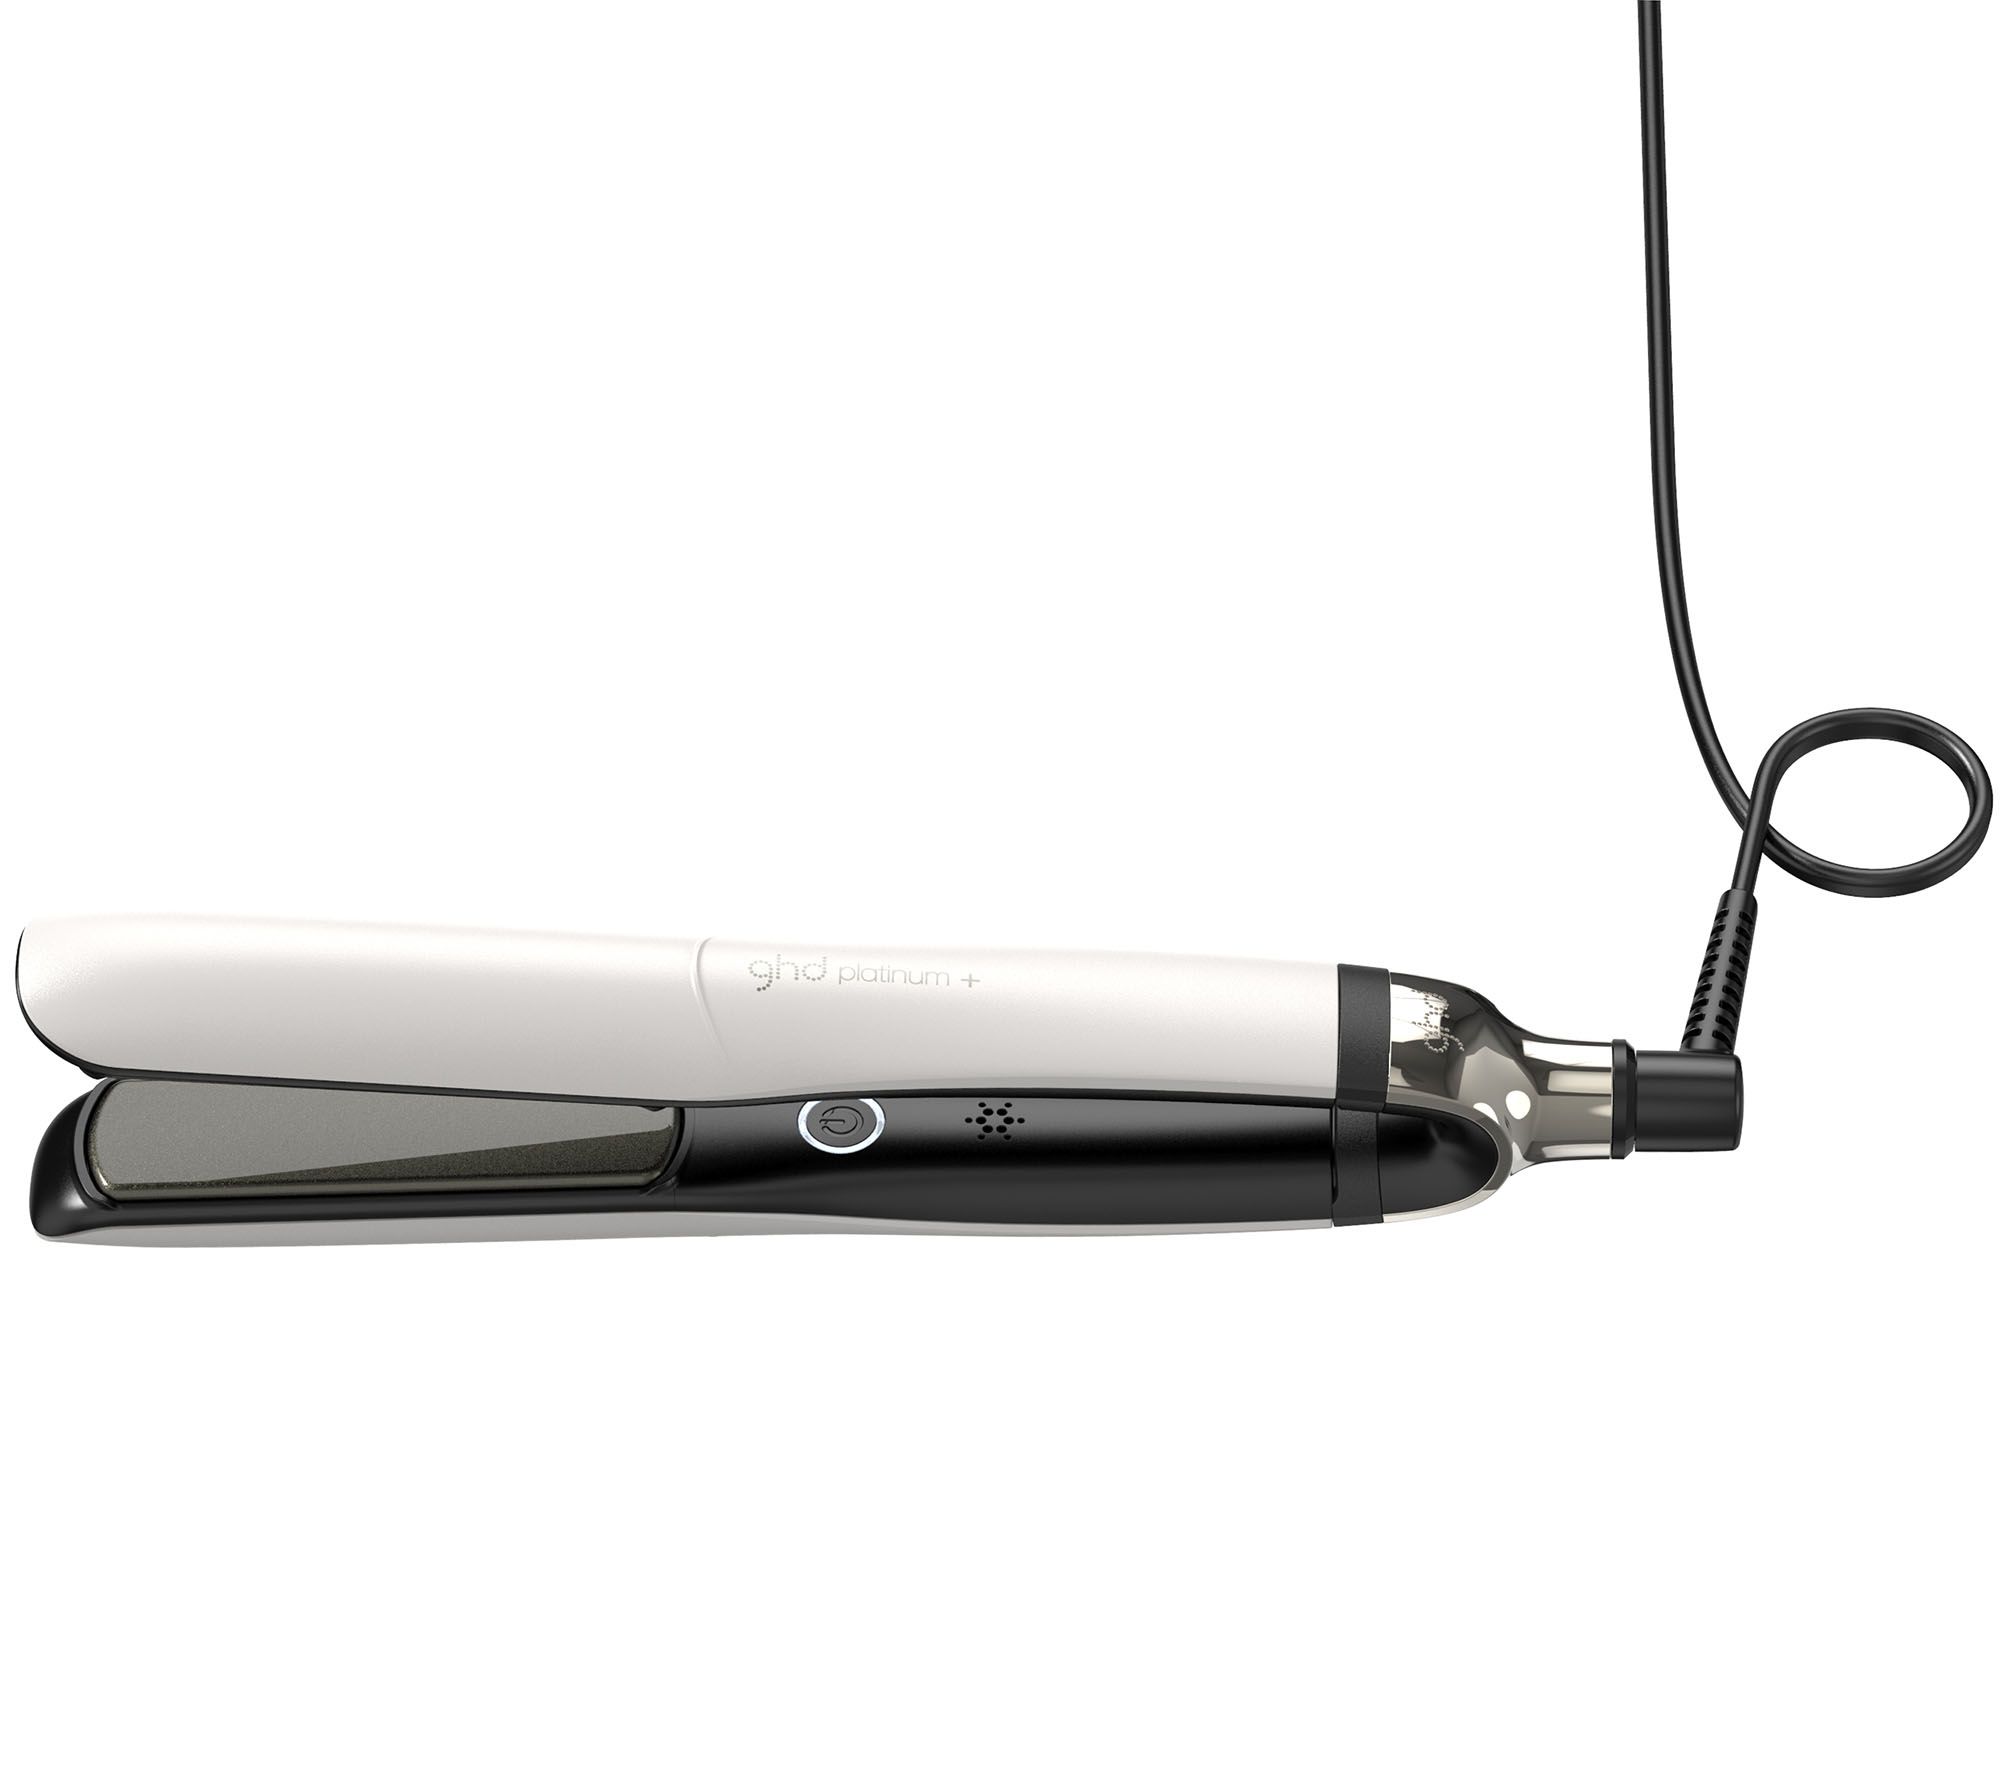 GHD Platinum Plus Professional Performance Styler Flat Iron - S8T262 Black  by GHD for Unisex - 1 Inch Flat Iron